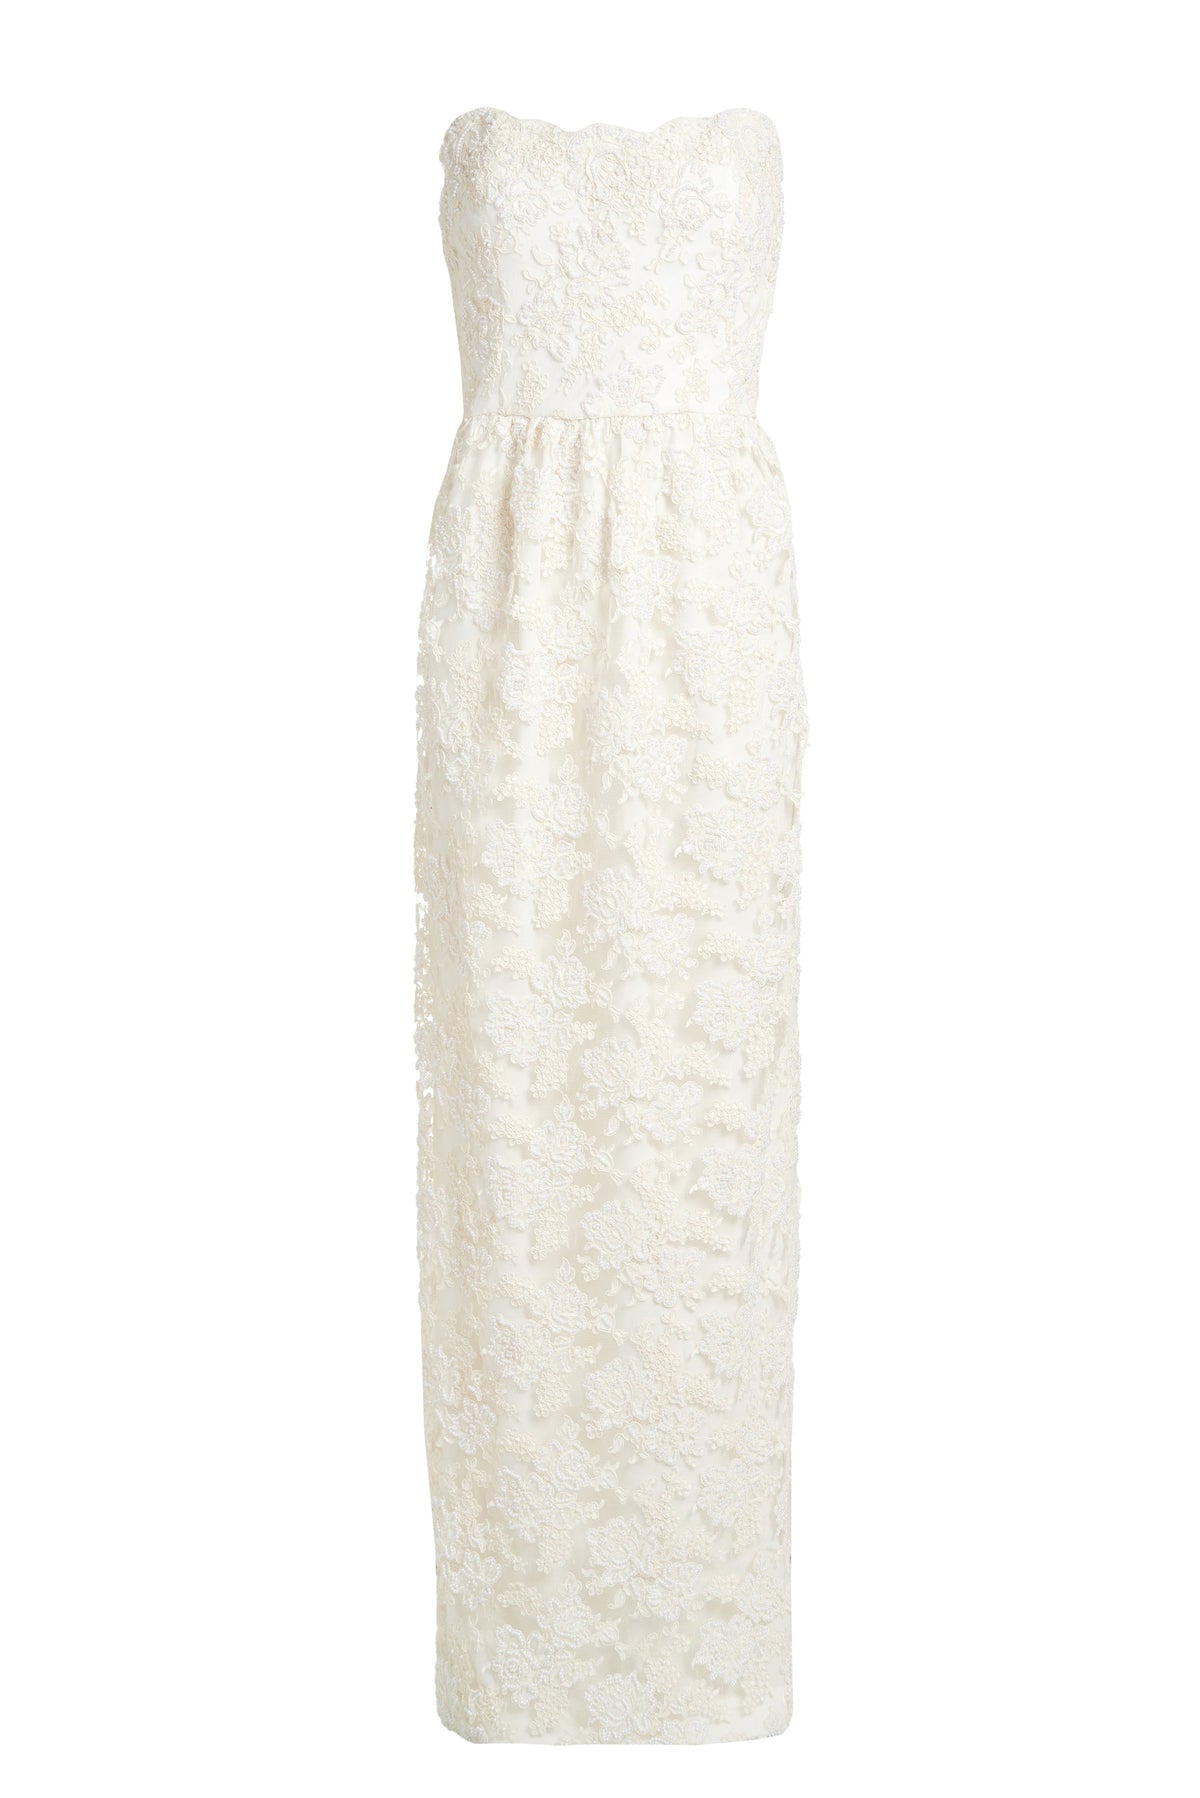 Evora Pearl Beaded Lace Gown with Large Detachable Bow